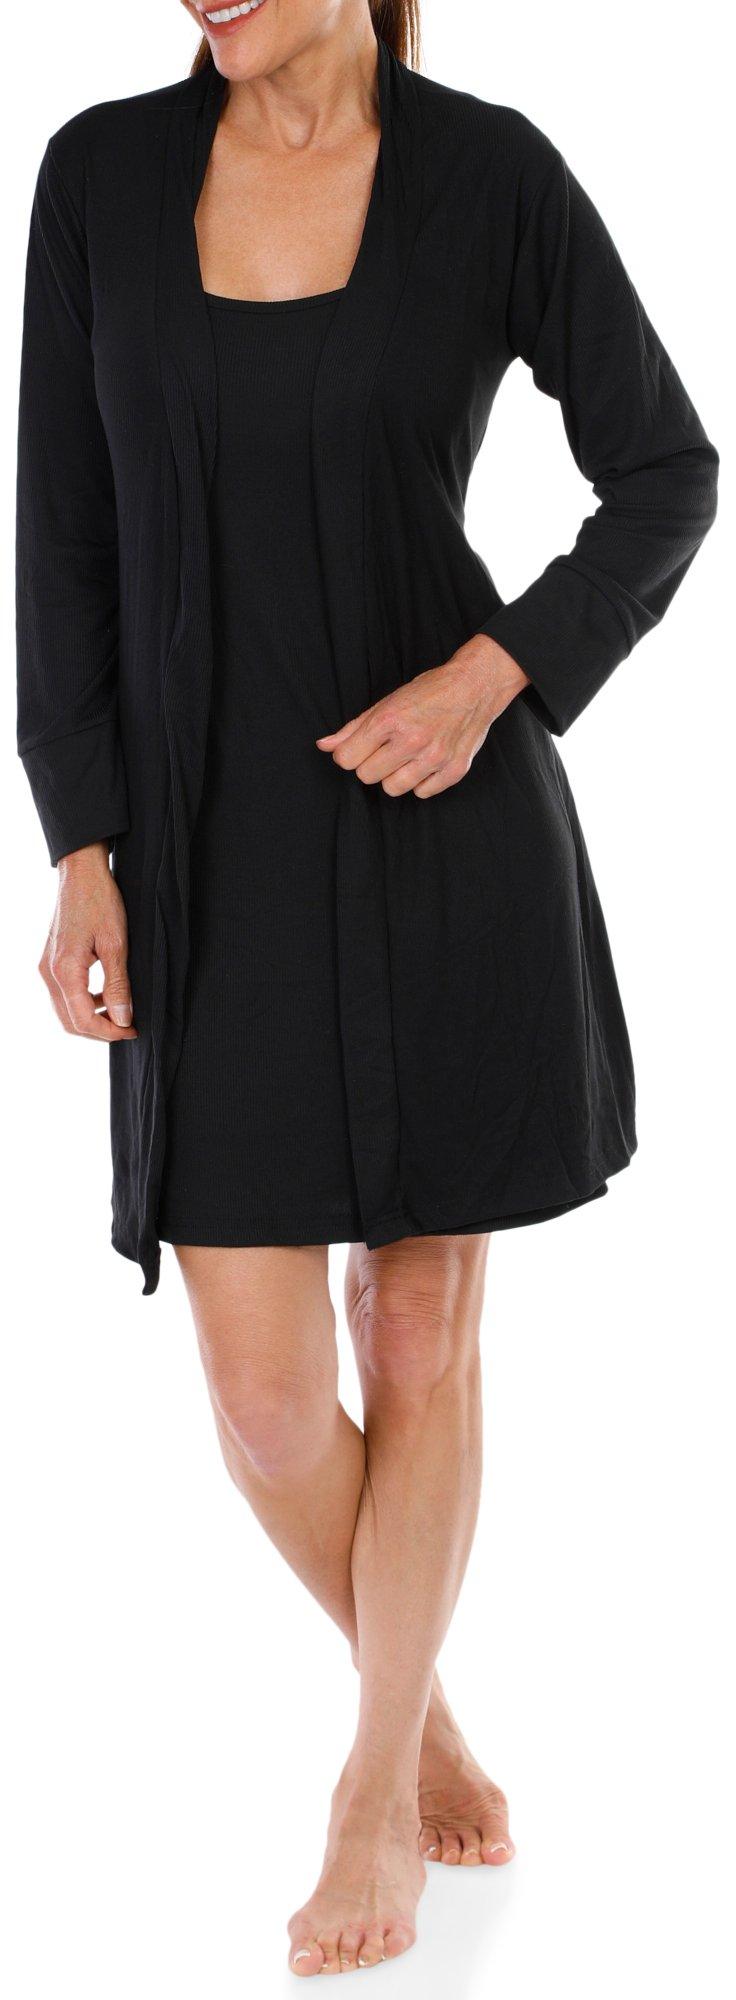 Women's Ribbed Nightgown & Robe Set